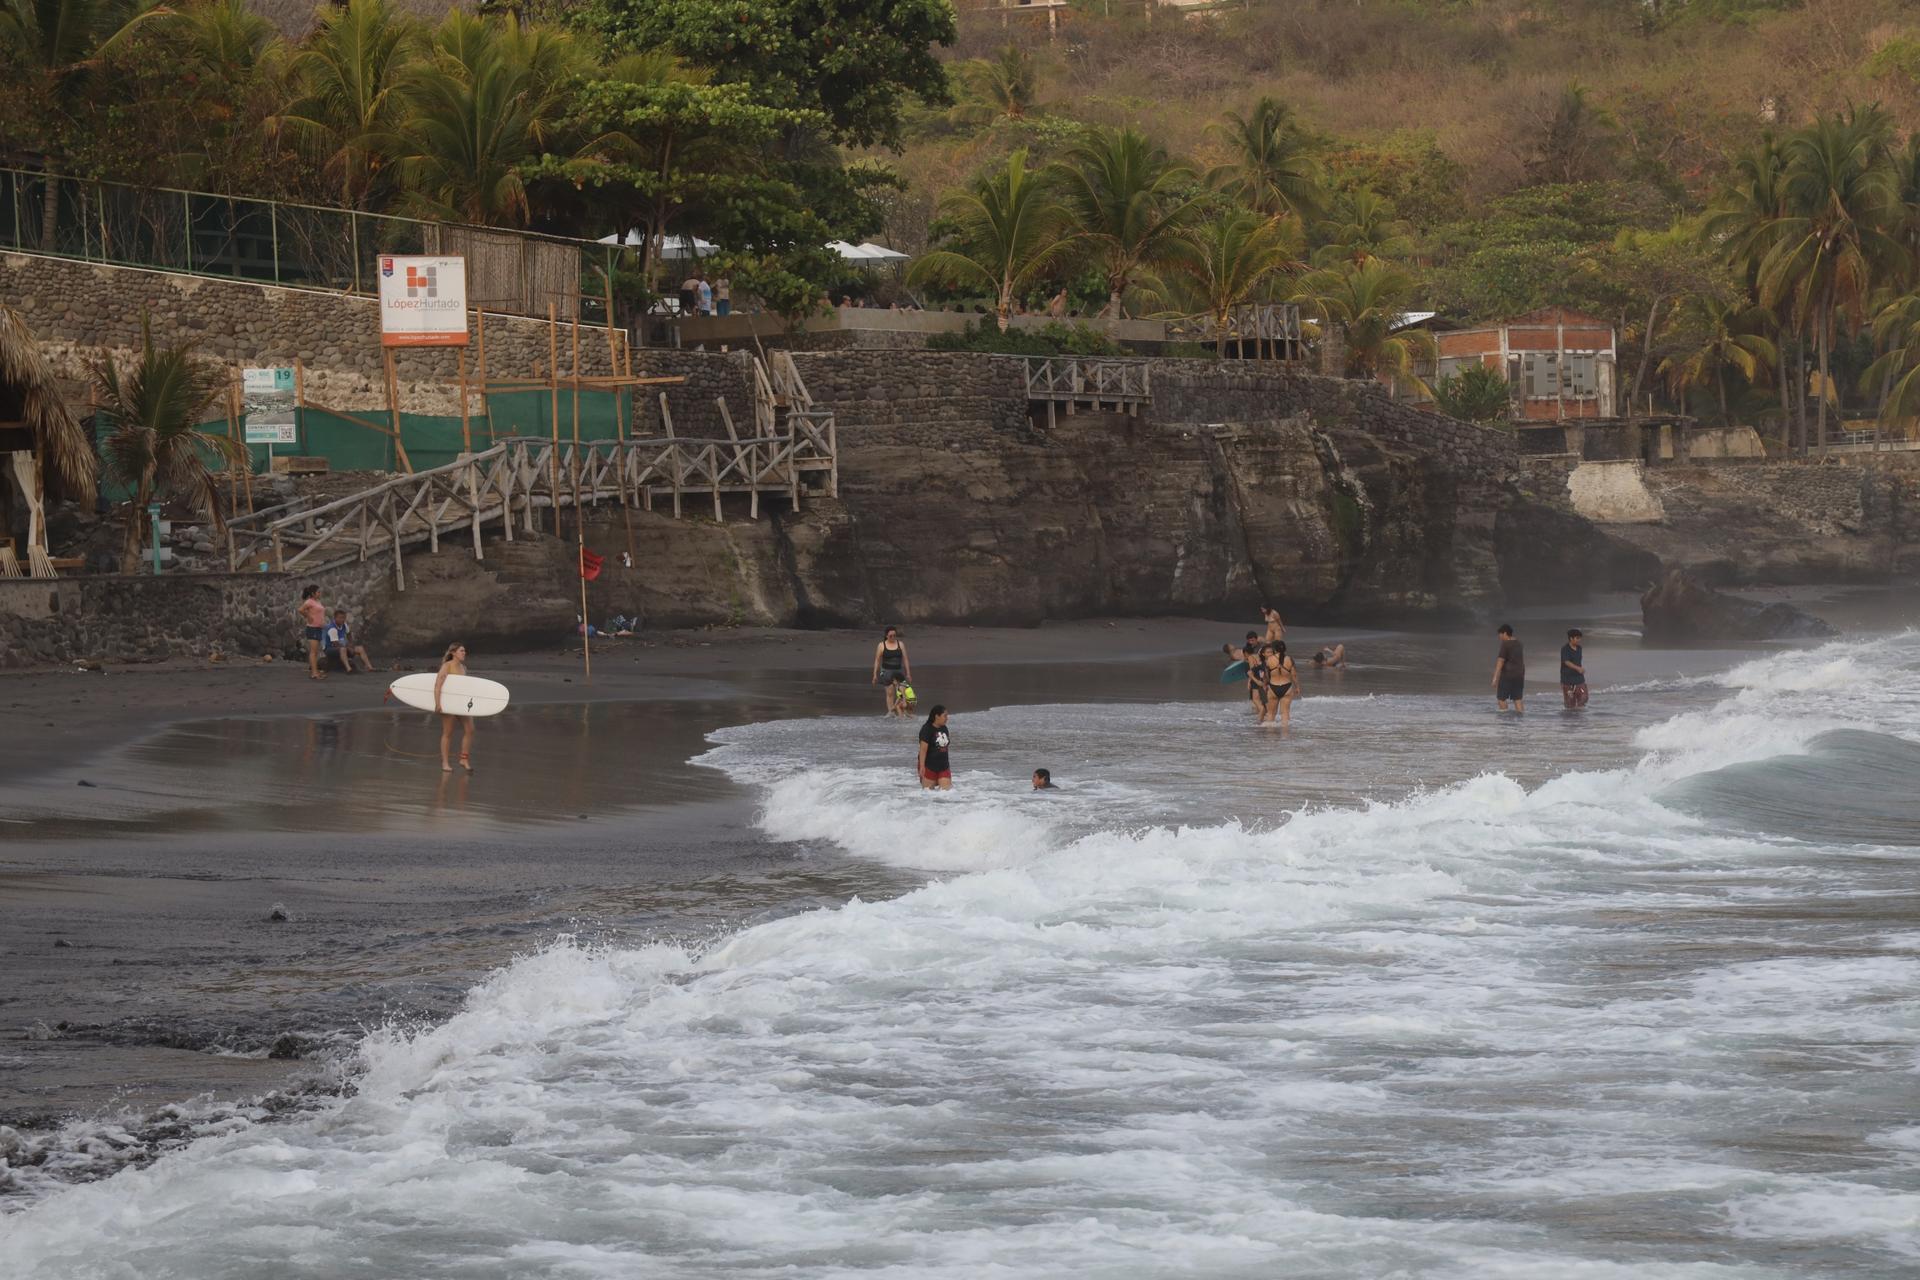 Bitcoin Beach was founded in 2019 by US surfer and entrepreneur Mike Peterson, El Zonte, El Salvador.